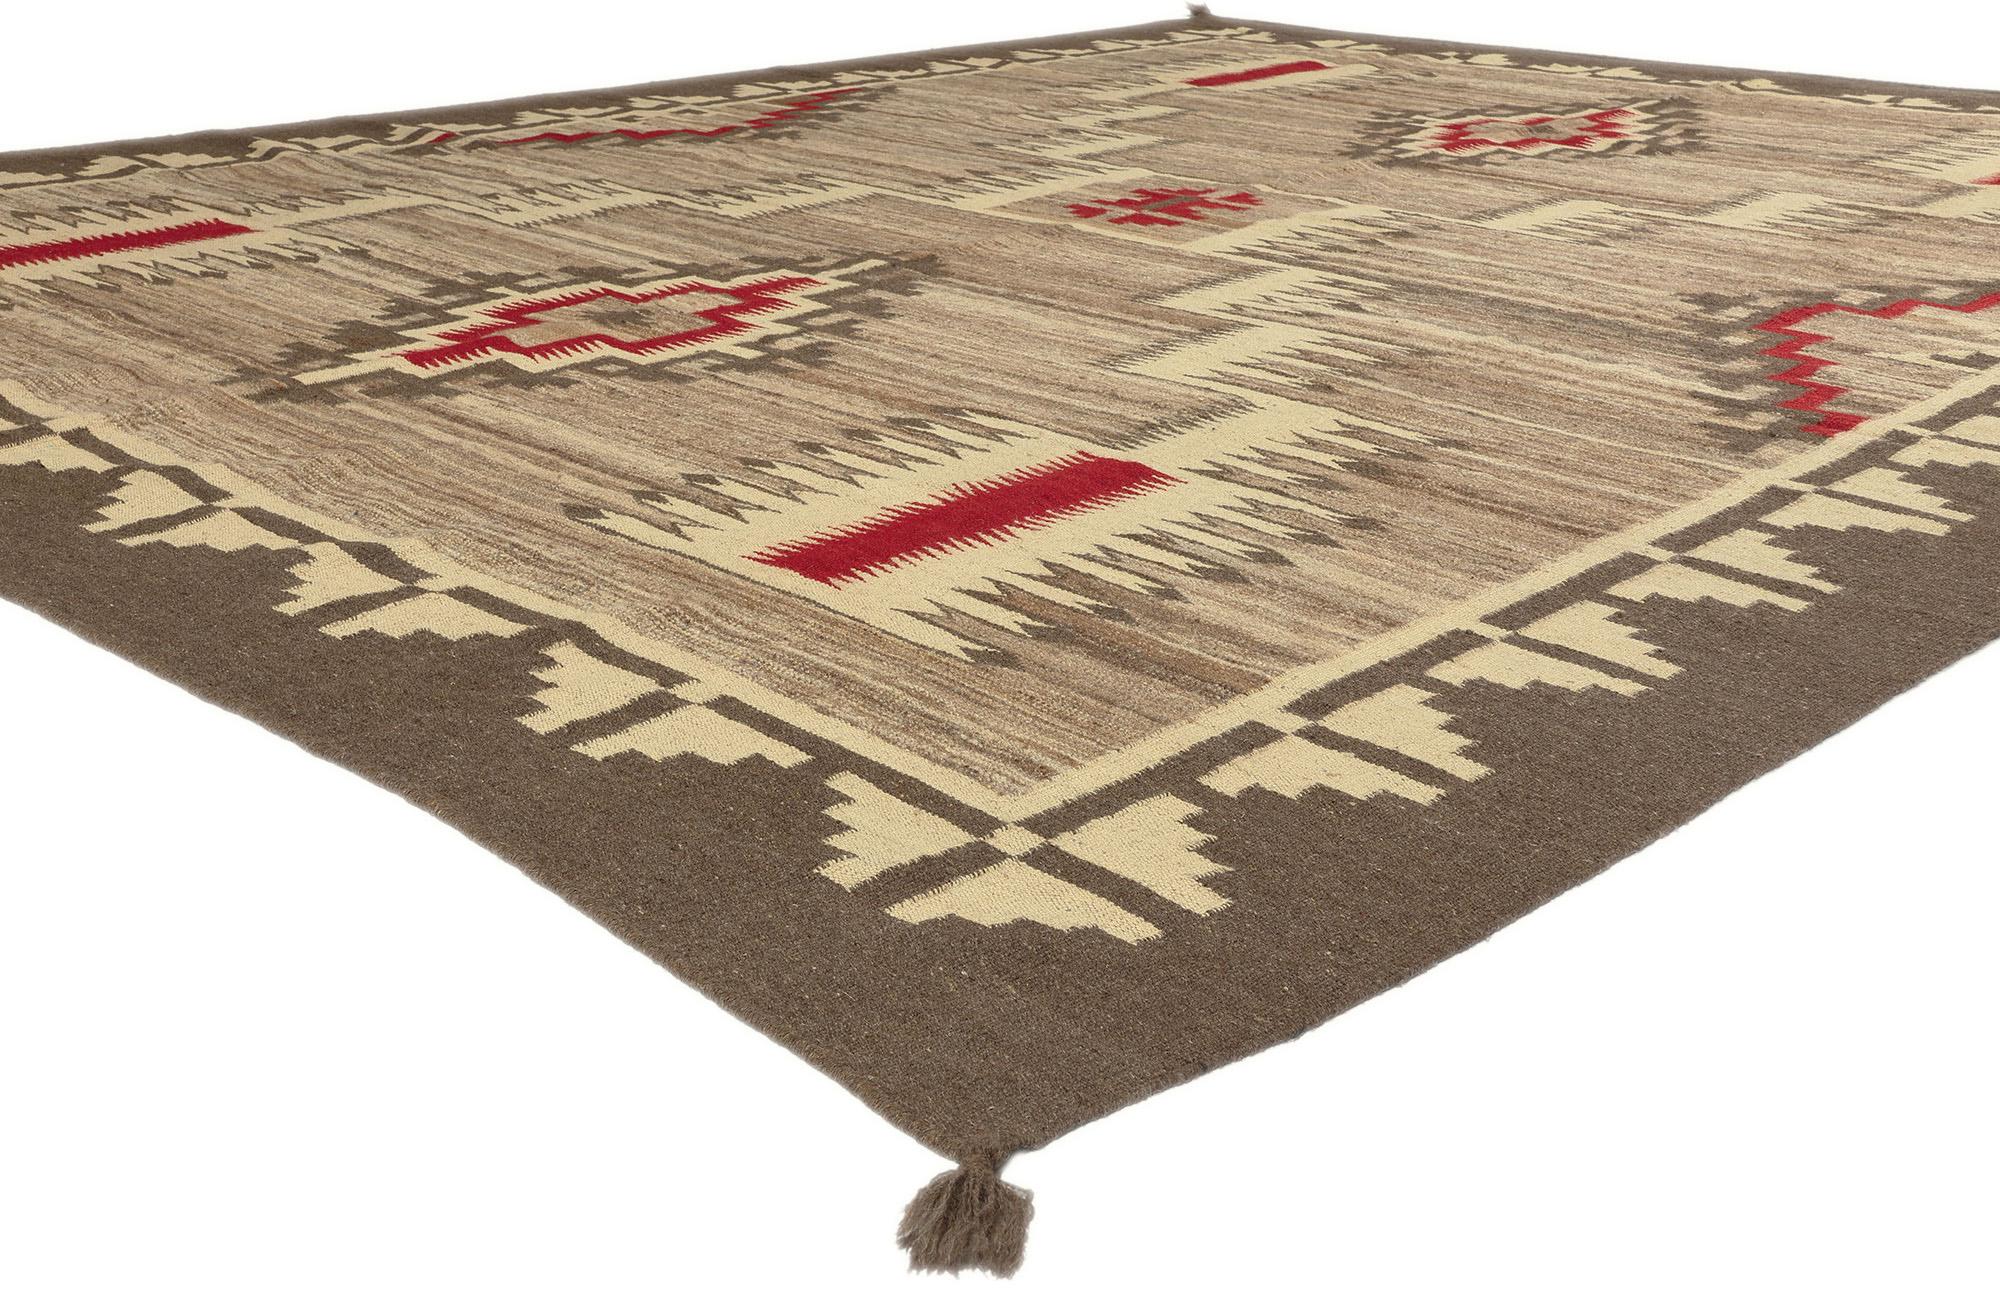 81033 Southwest Modern Navajo-Style Kilim Rug with Storm Pattern, 09'04 x 11'07. Step into the contemporary world of Native American design aesthetics and experience the convergence of Southwestern and Desert Modern styles within this meticulously